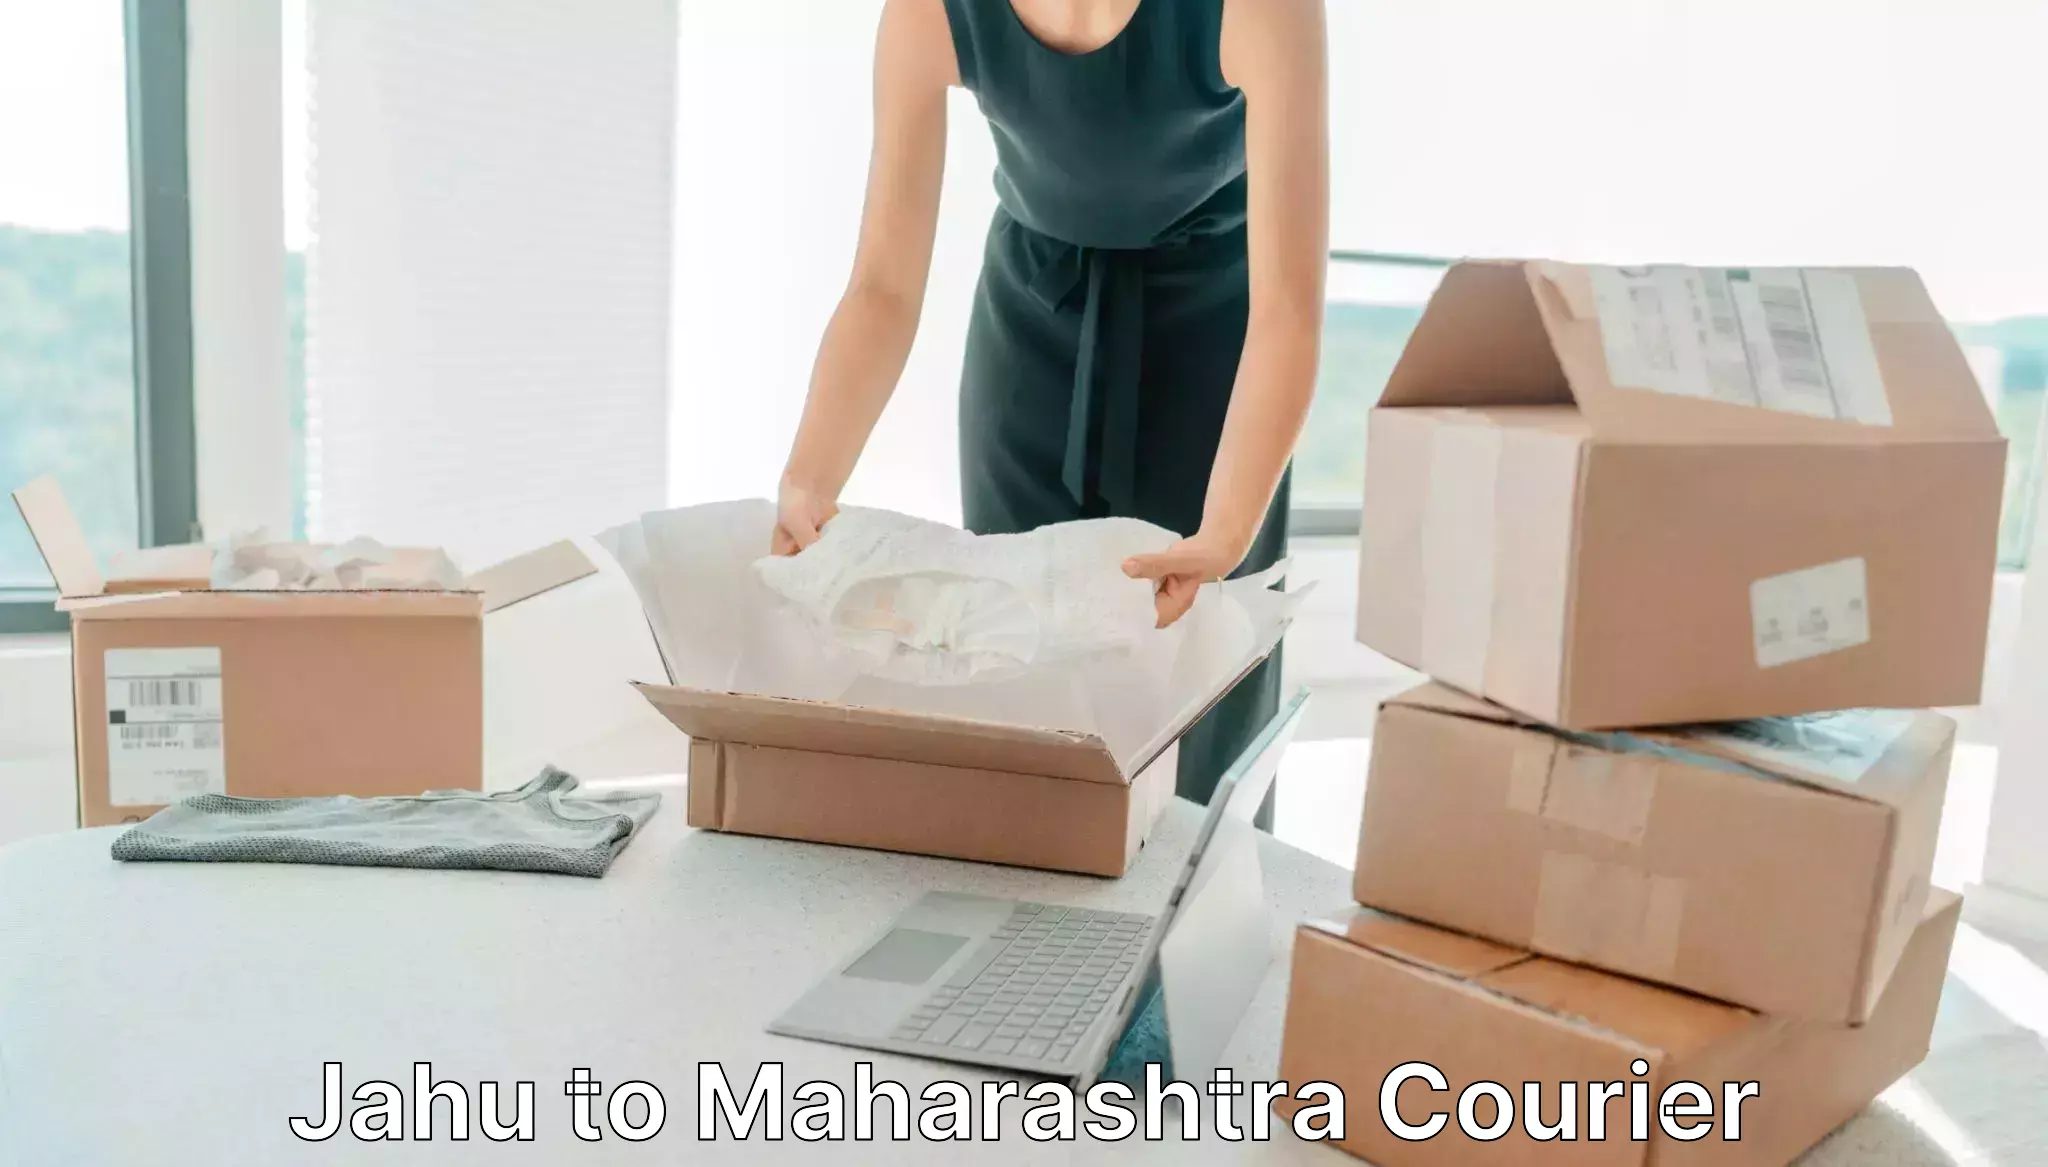 Nationwide shipping services Jahu to Vasai